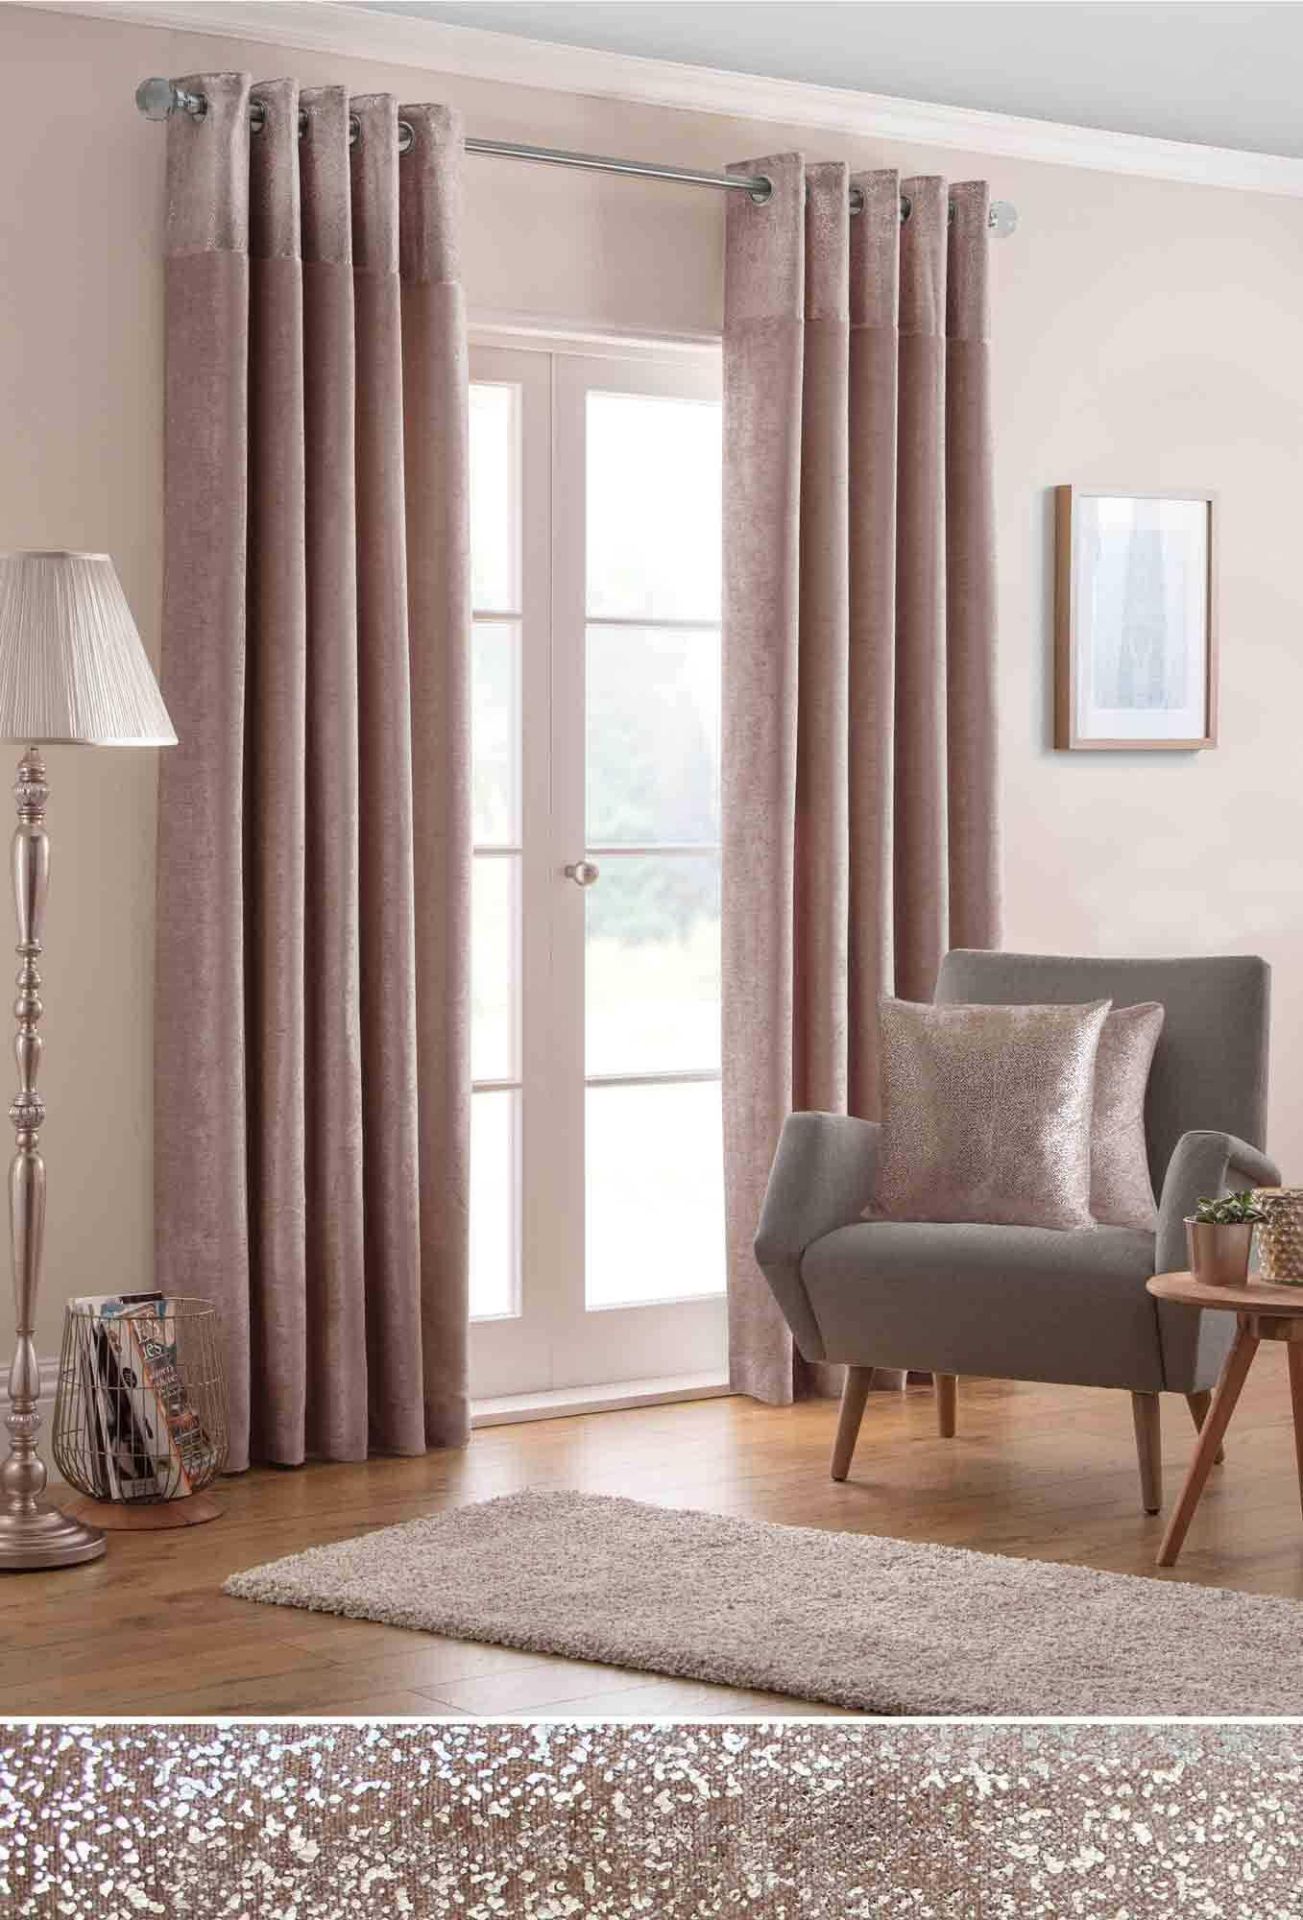 Combined Rrp £175 Lot To Contain 3 Assorted Curtains - Image 7 of 8